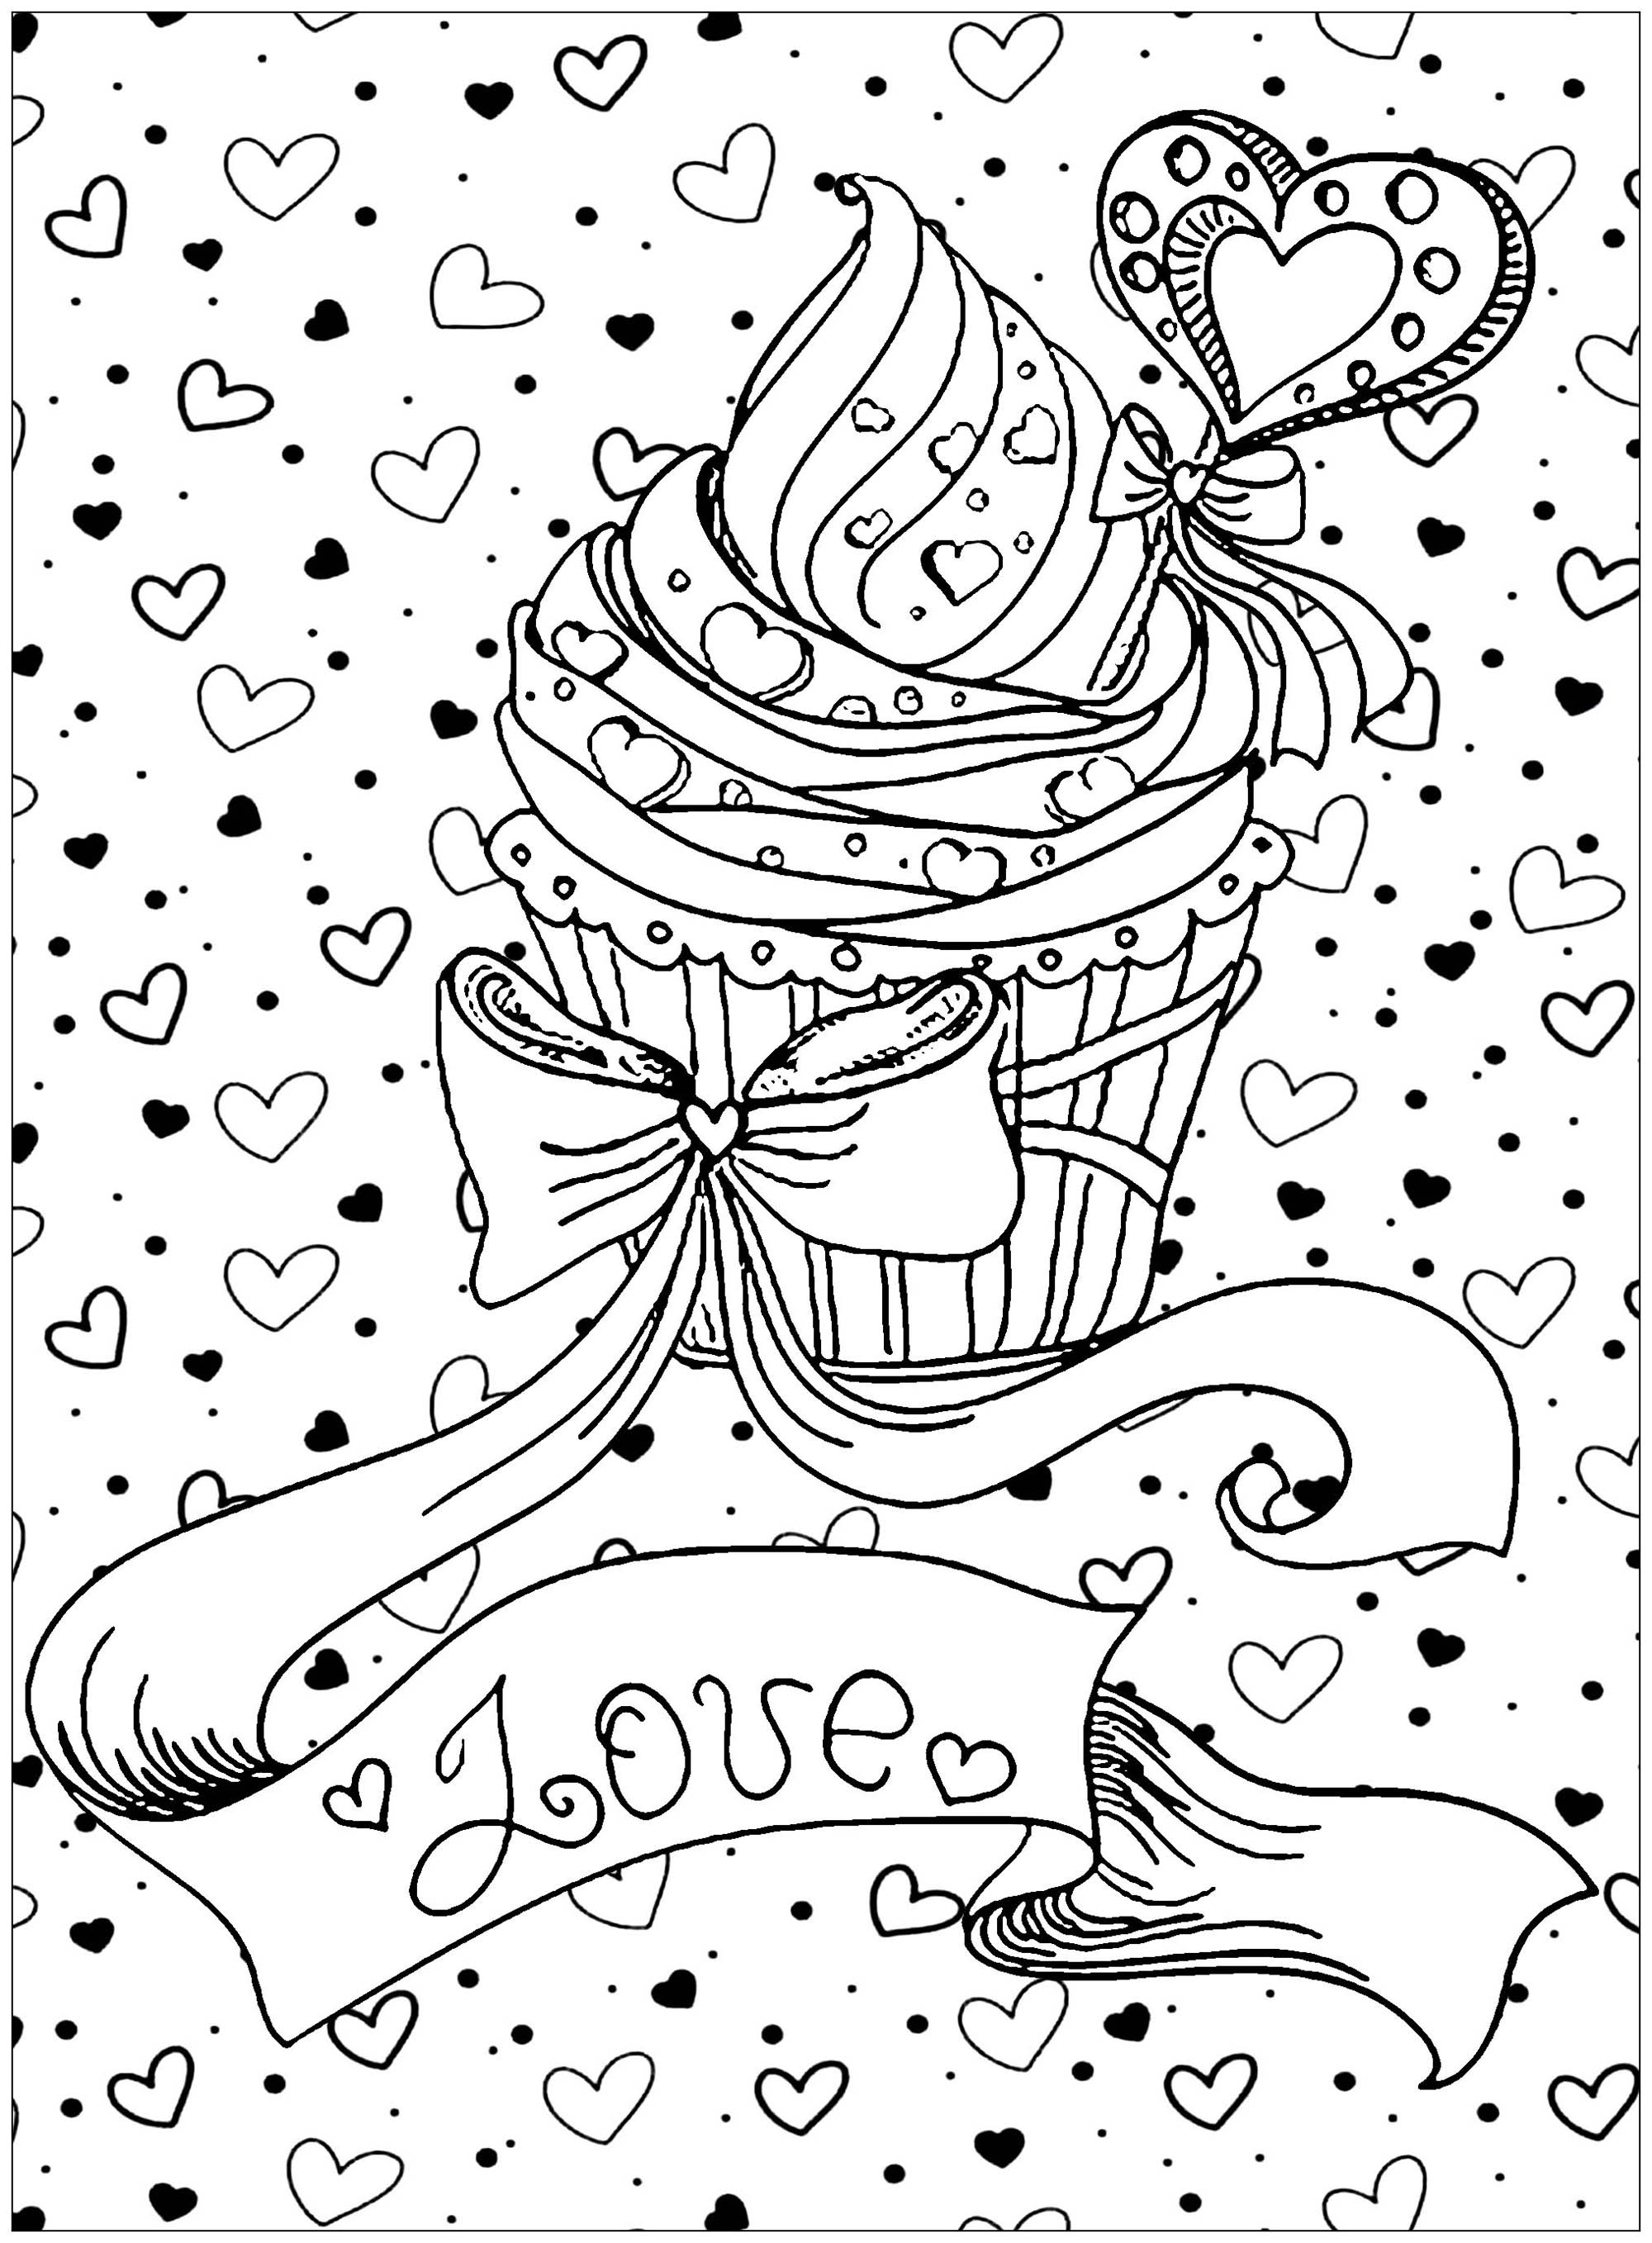 Cupcake love - Cupcakes Adult Coloring Pages